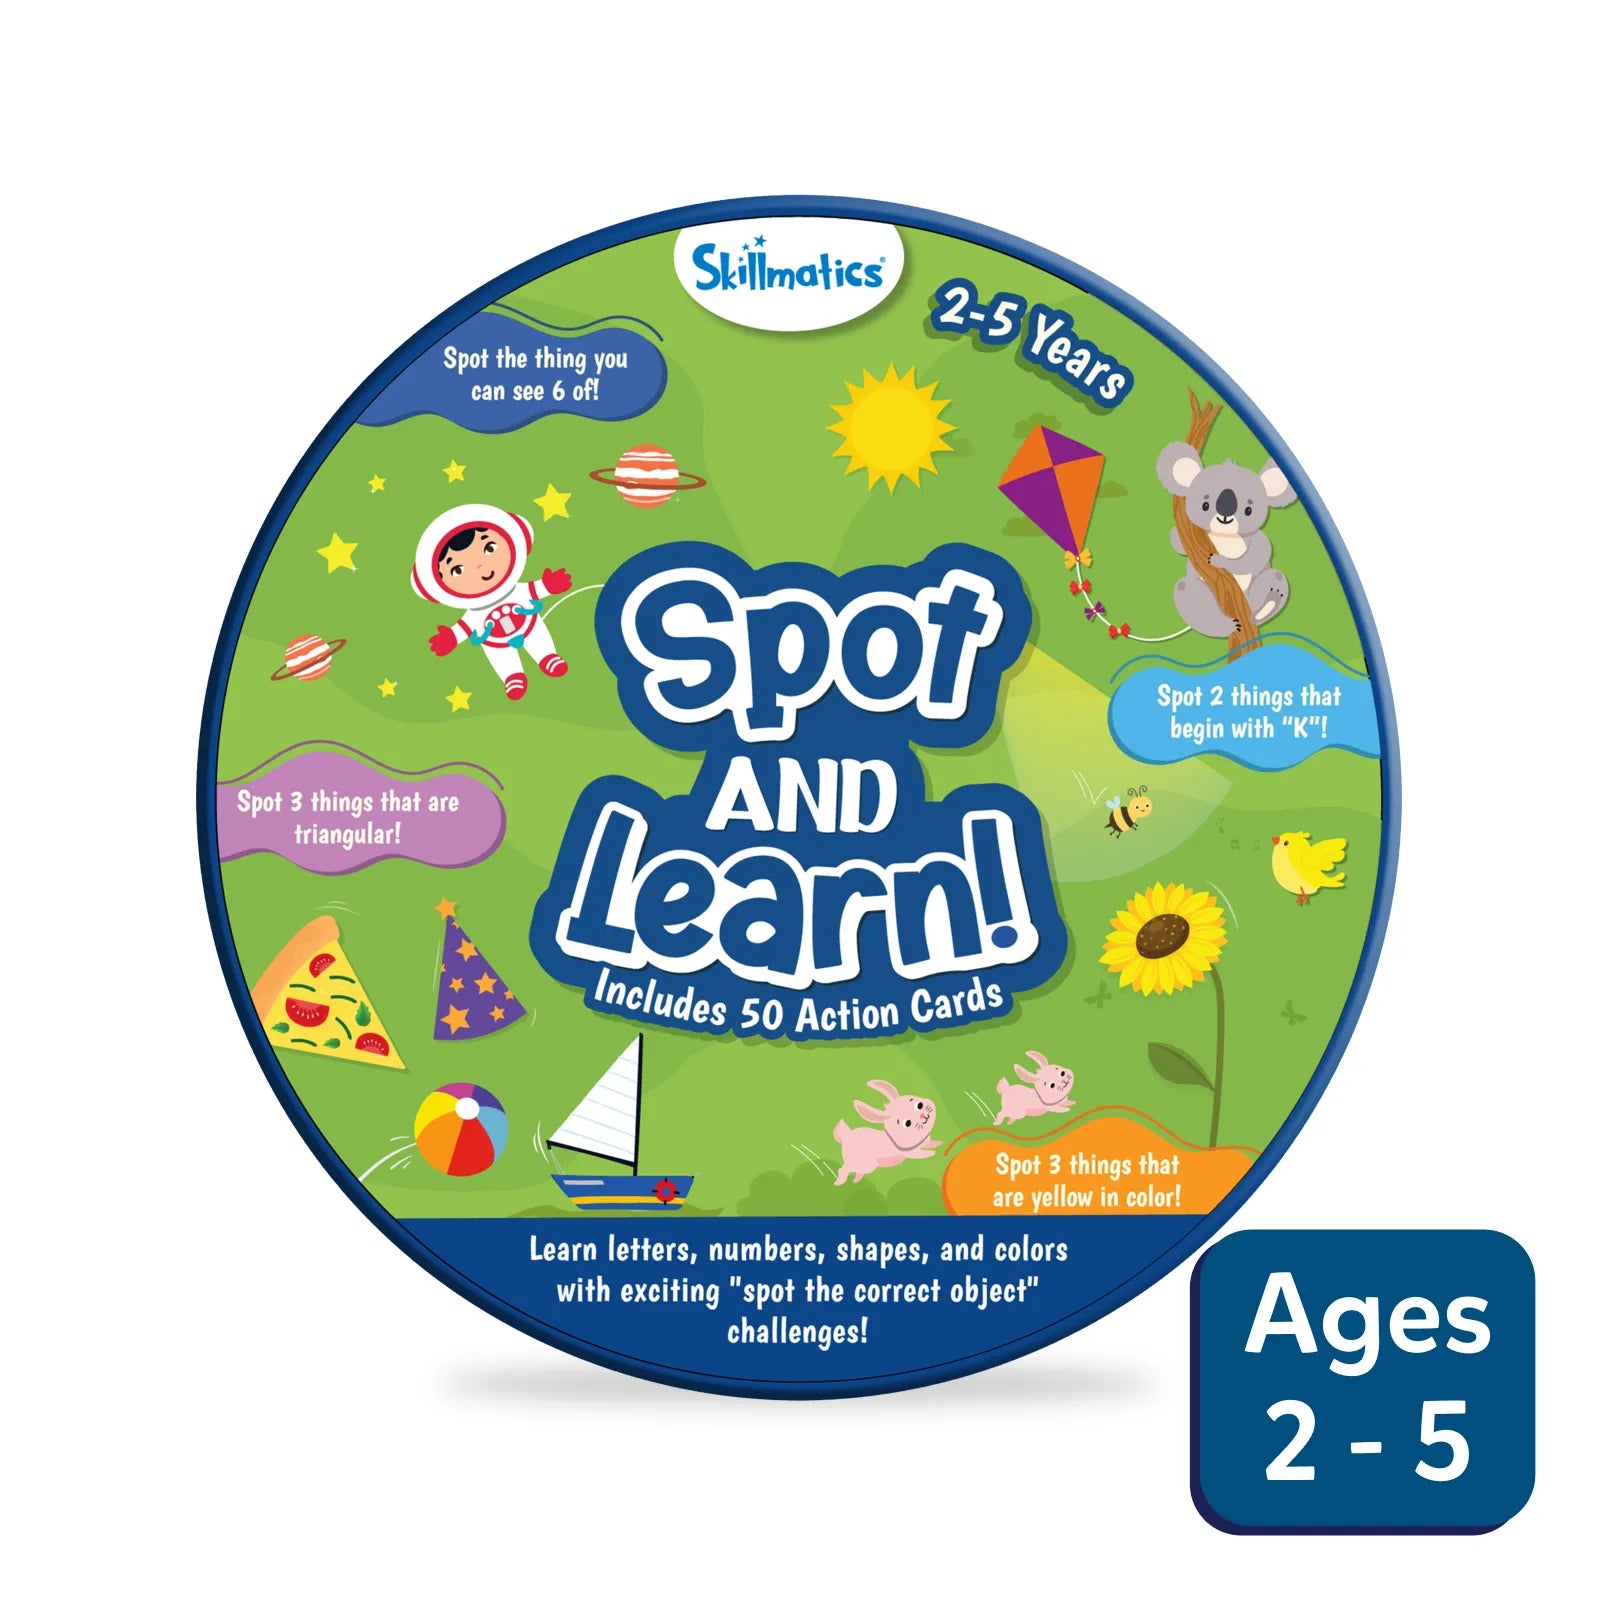 Spot and Learn - Flash Cards for Toddlers (ages 2-5)